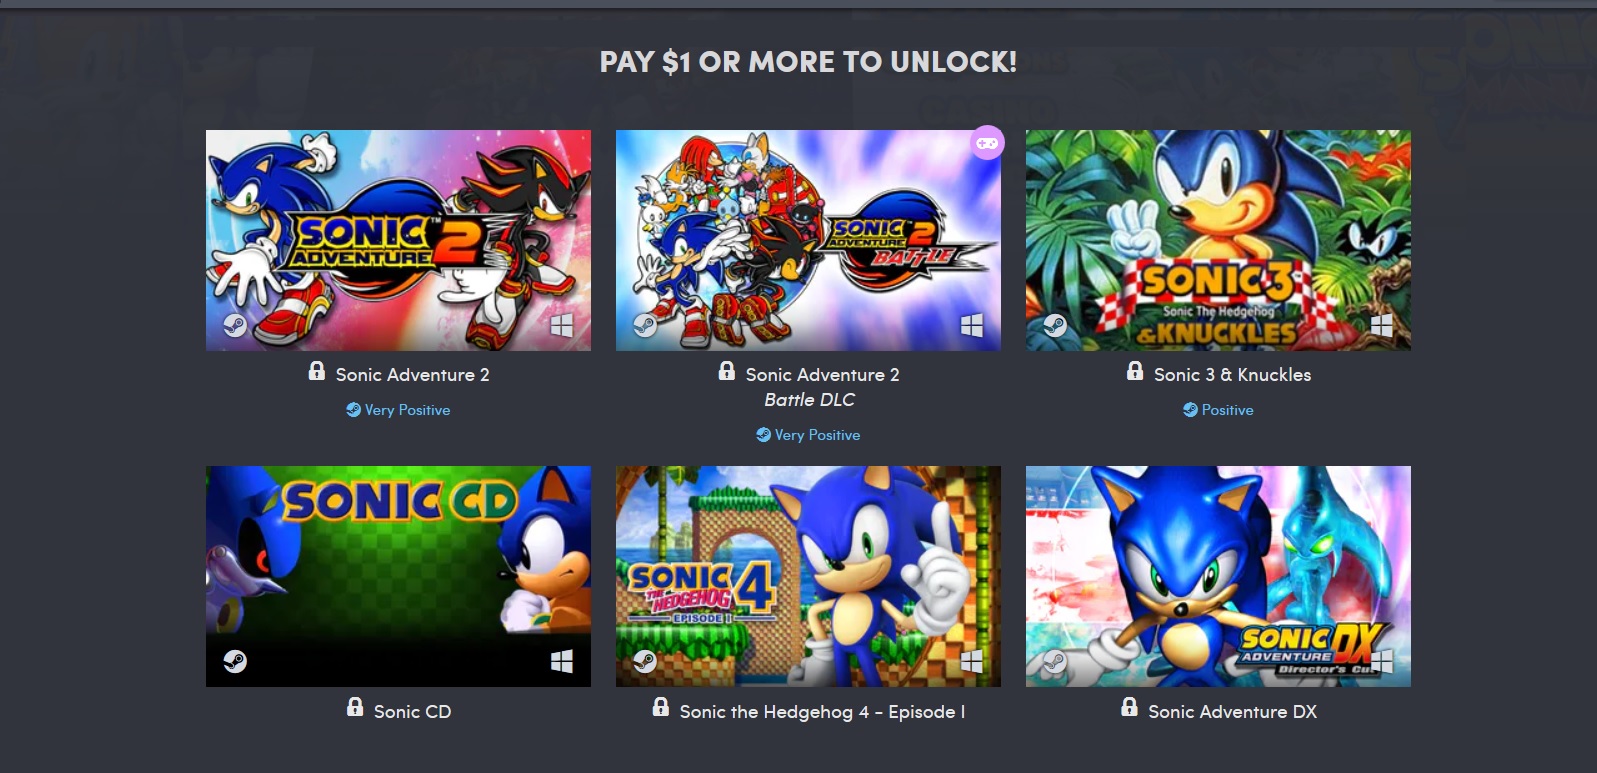 Buy SONIC ADVENTURE 2: BATTLE from the Humble Store